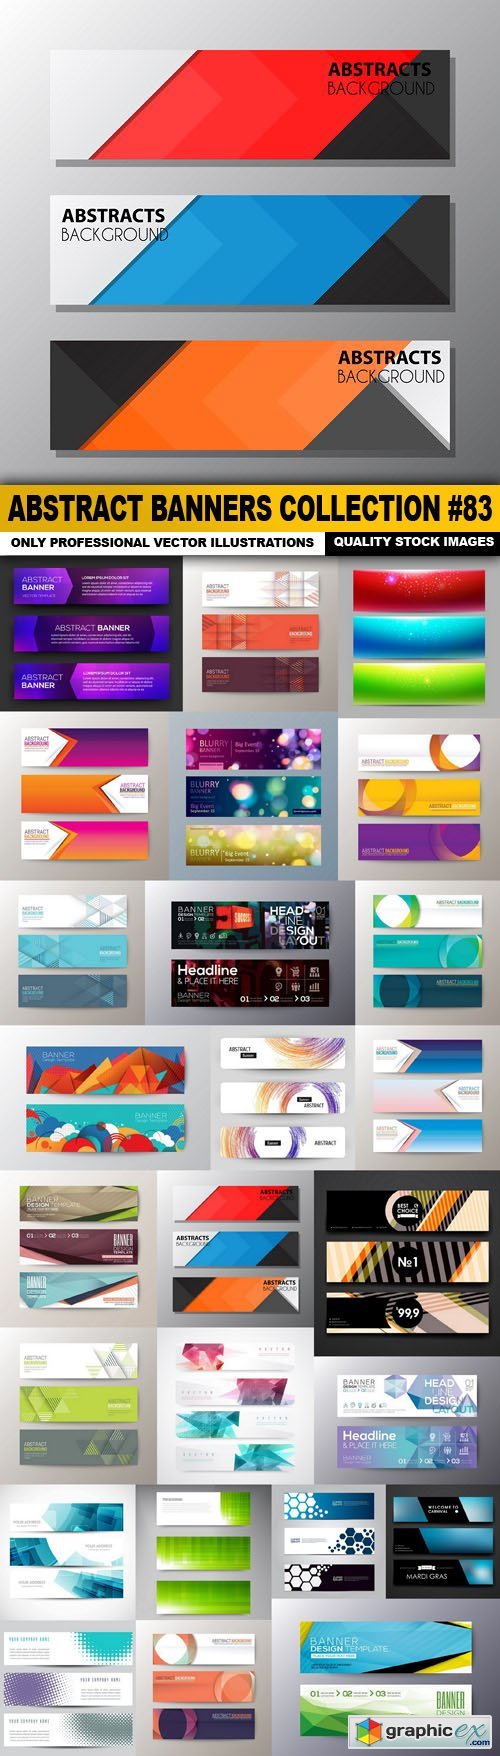 Abstract Banners Collection #83